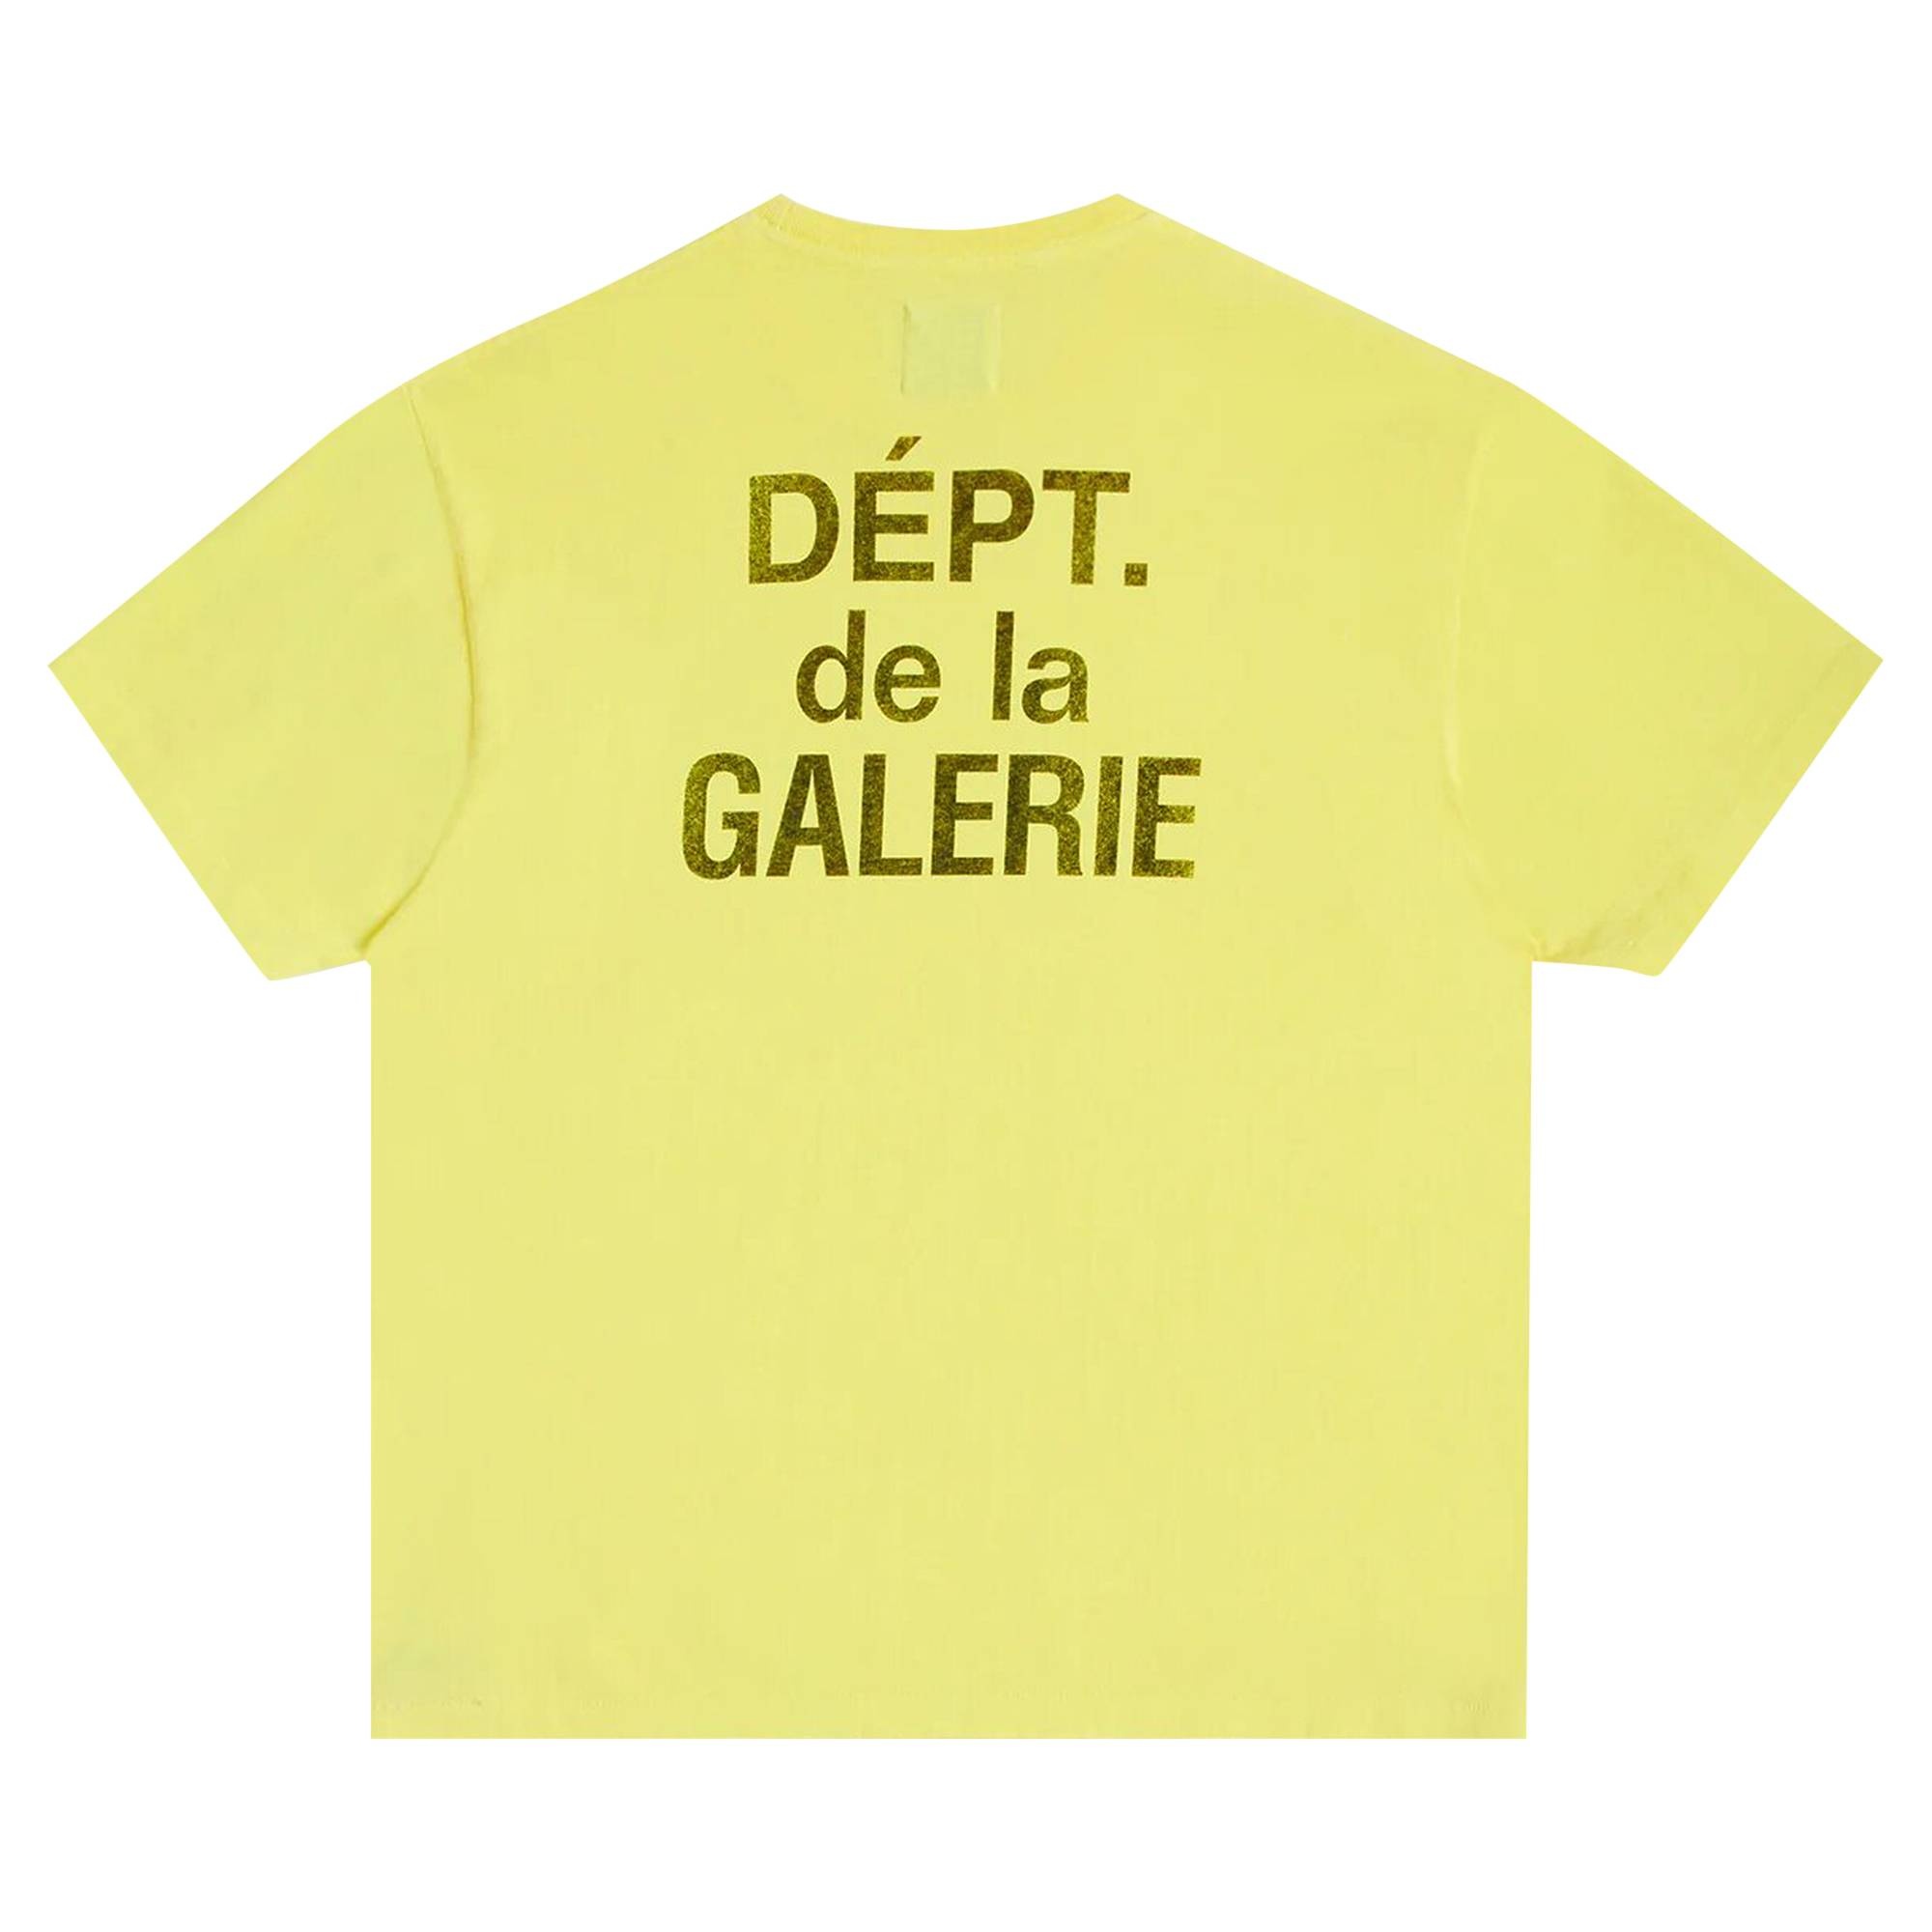 Gallery Dept. French Tee 'Flo Yellow' - 2